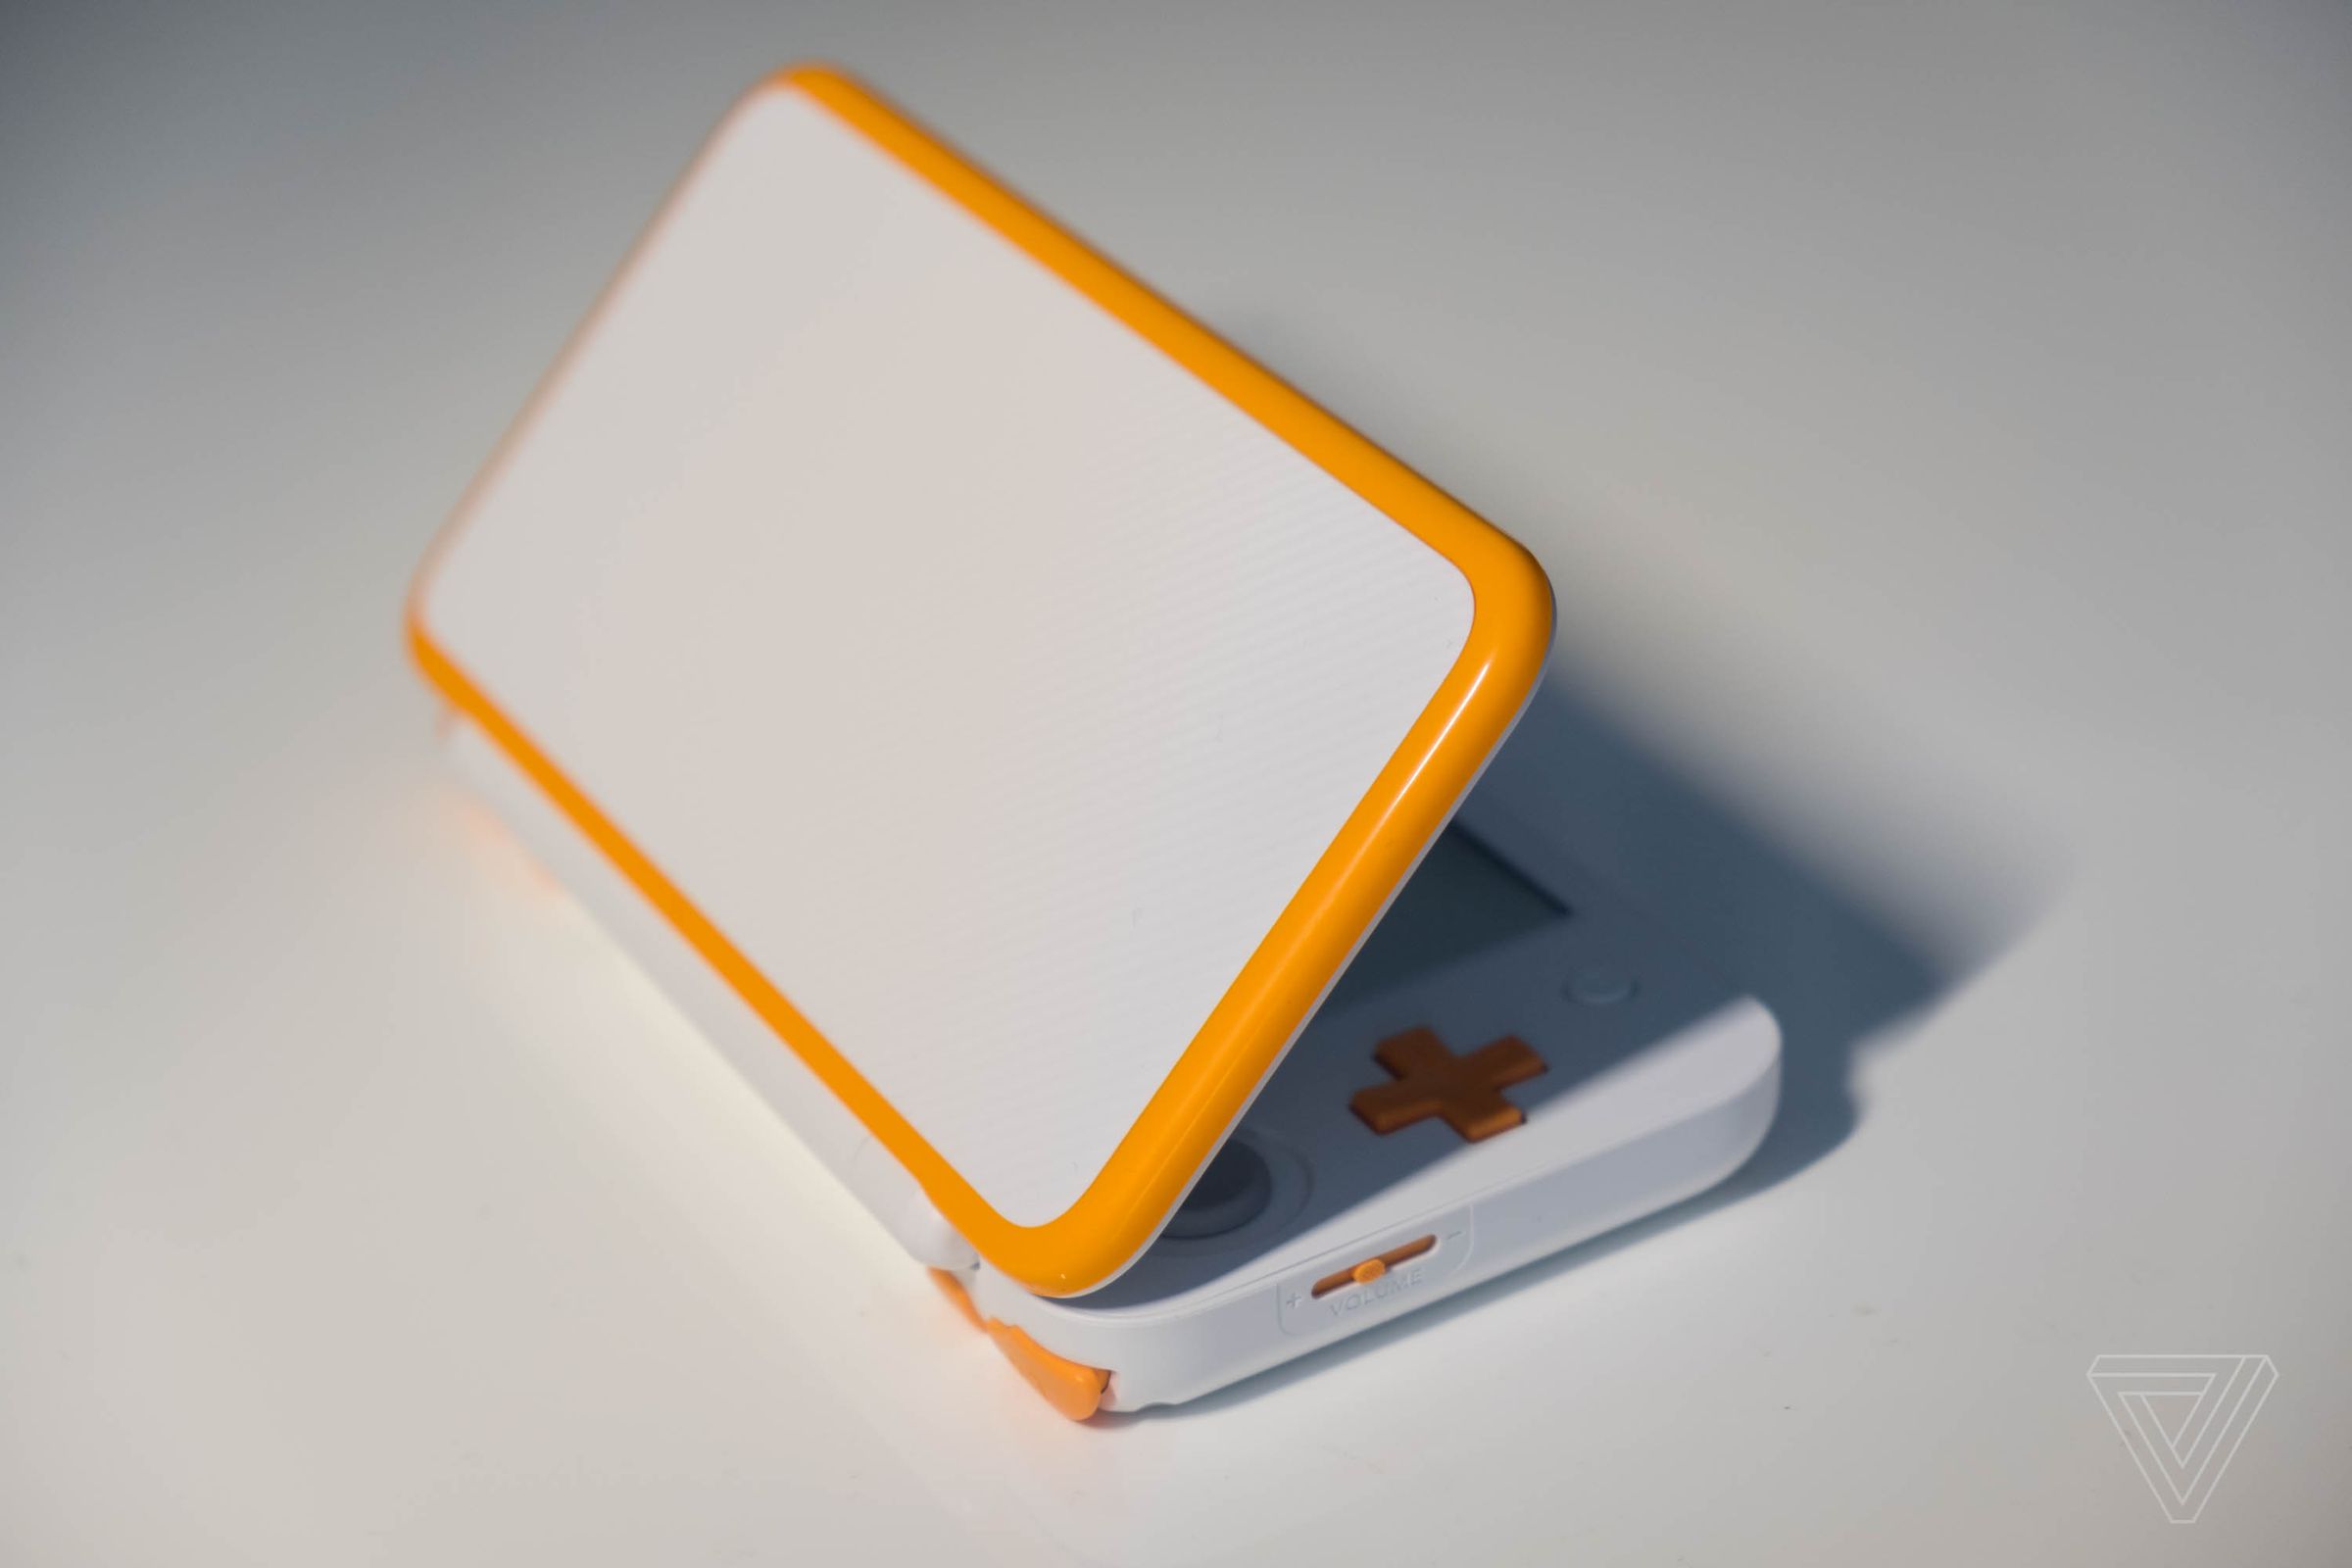 The New Nintendo 2DS XL.